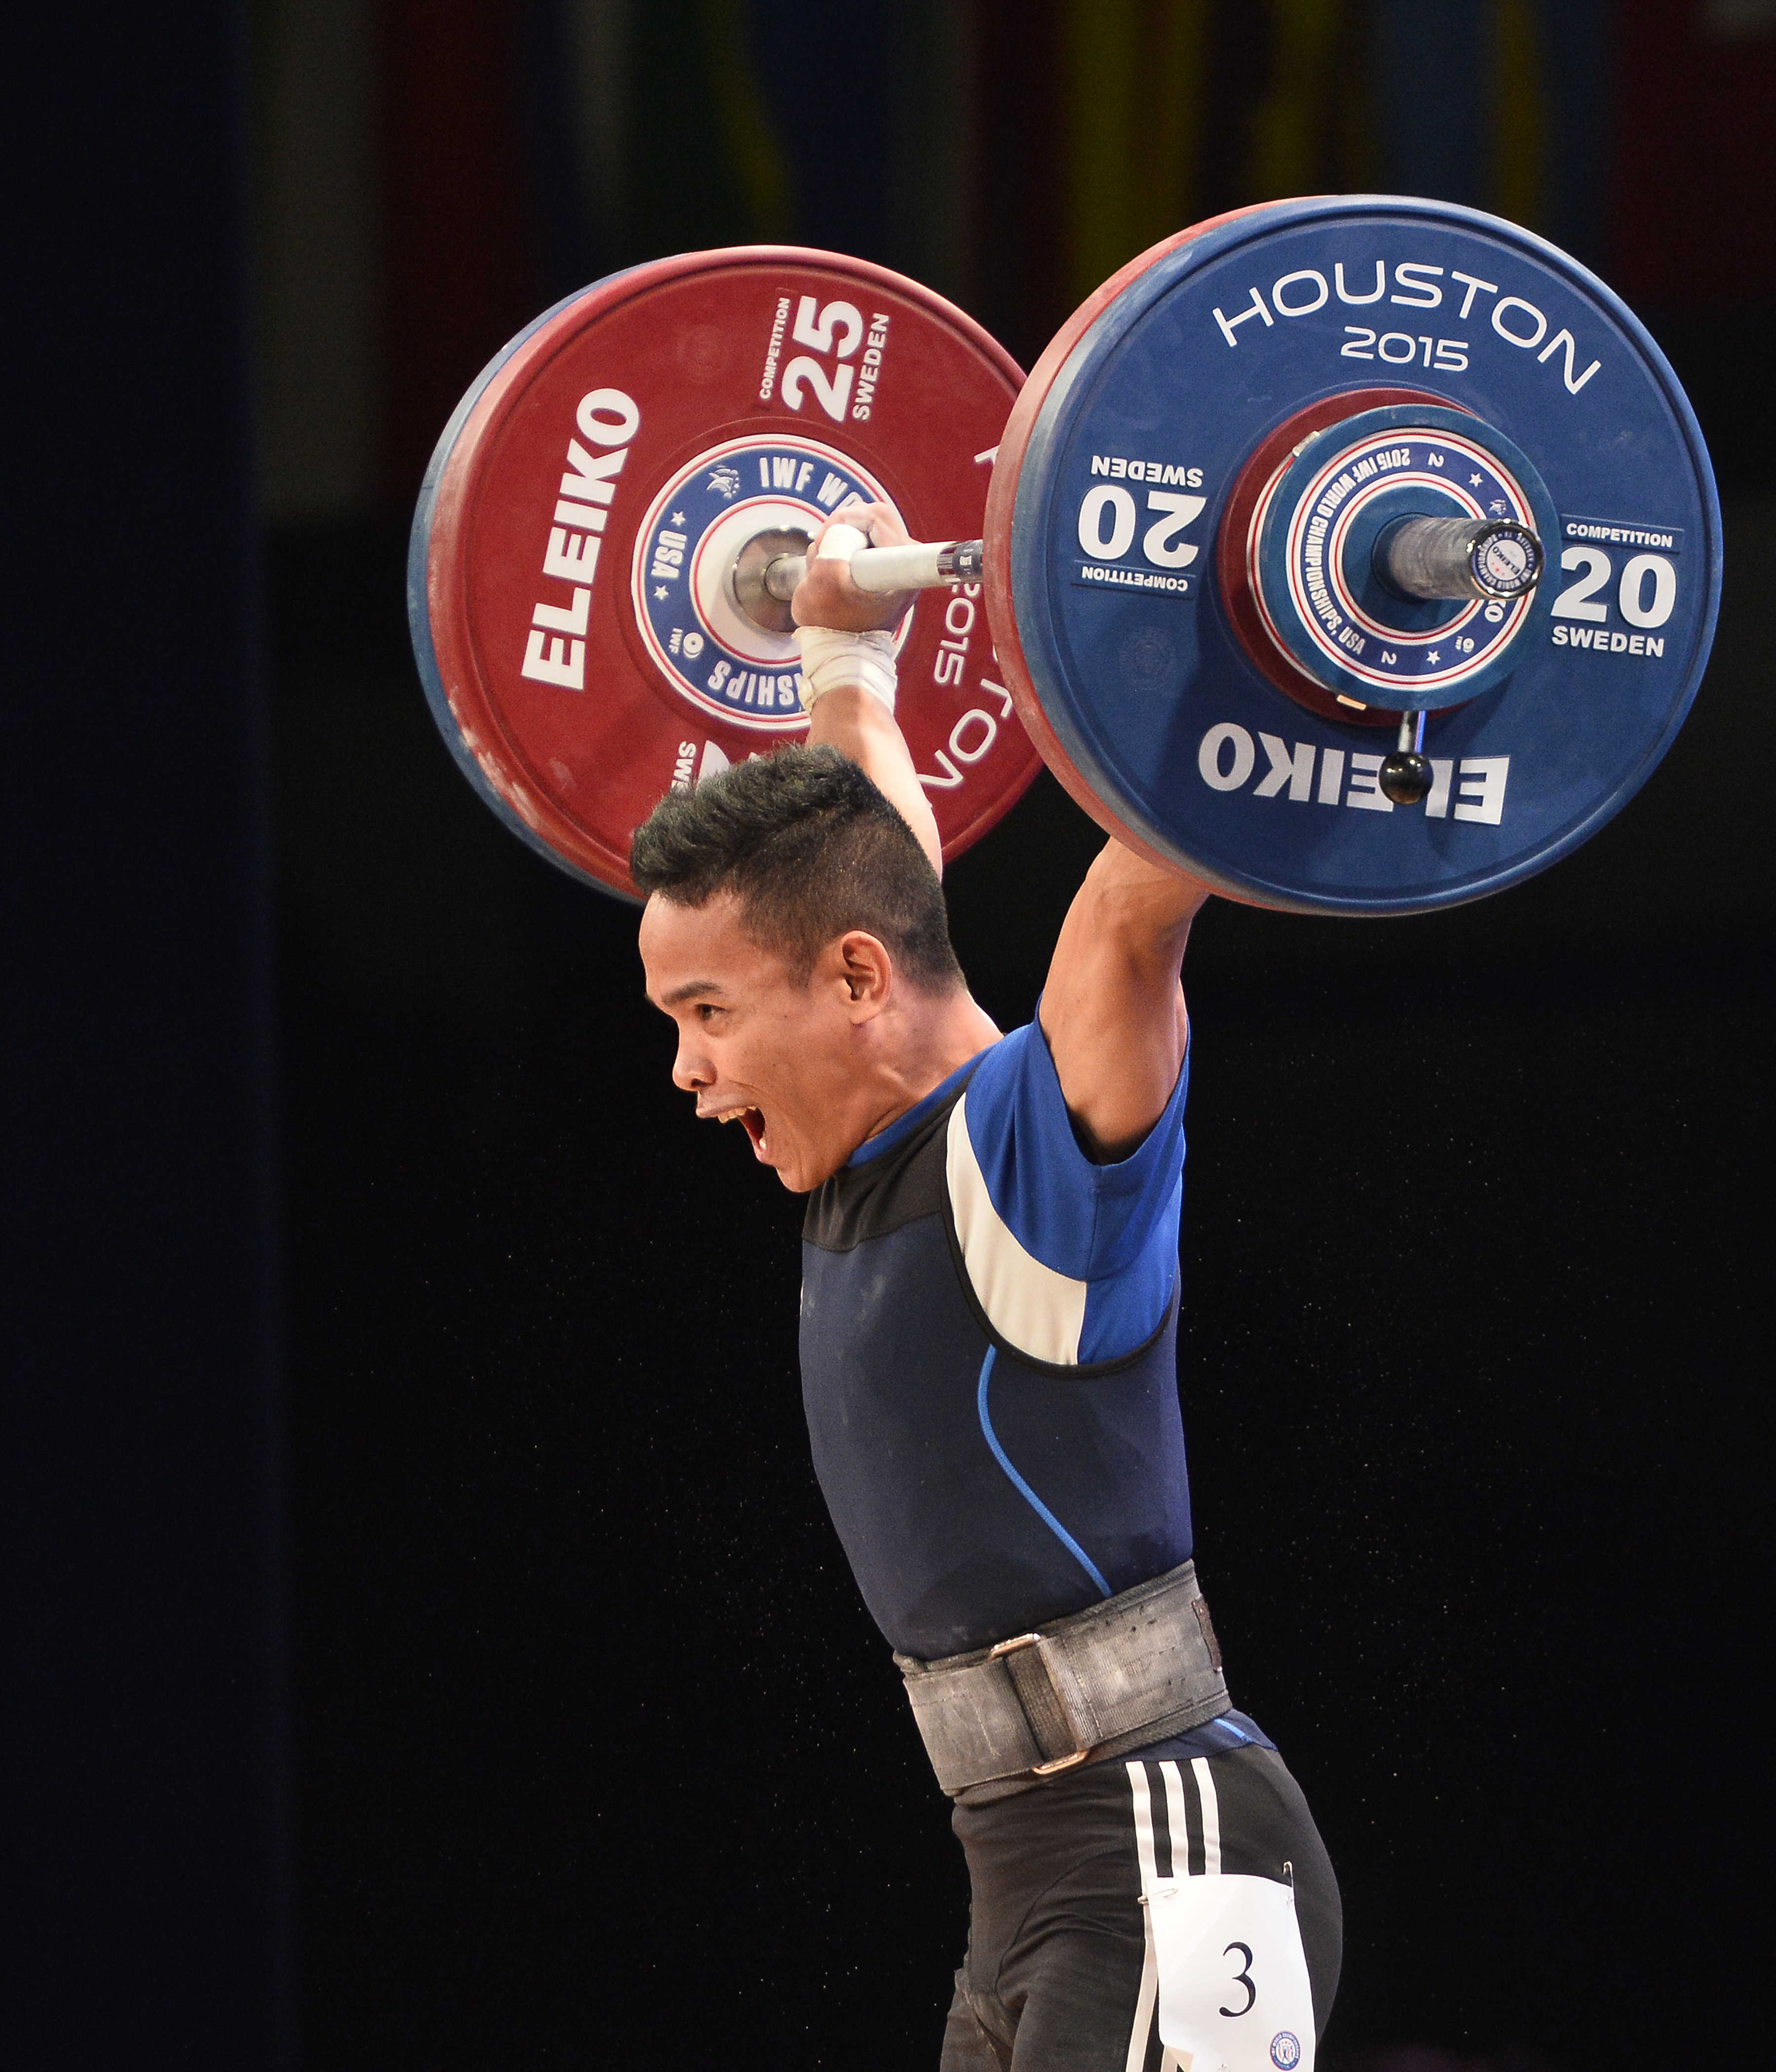 BRONZE MEDALIST. Nestor Colonia completes this lift in the men's 56kg weight class at the 2015 Weightlifting World Championships, where he won a bronze medal. EPA/LARRY W. SMITH  